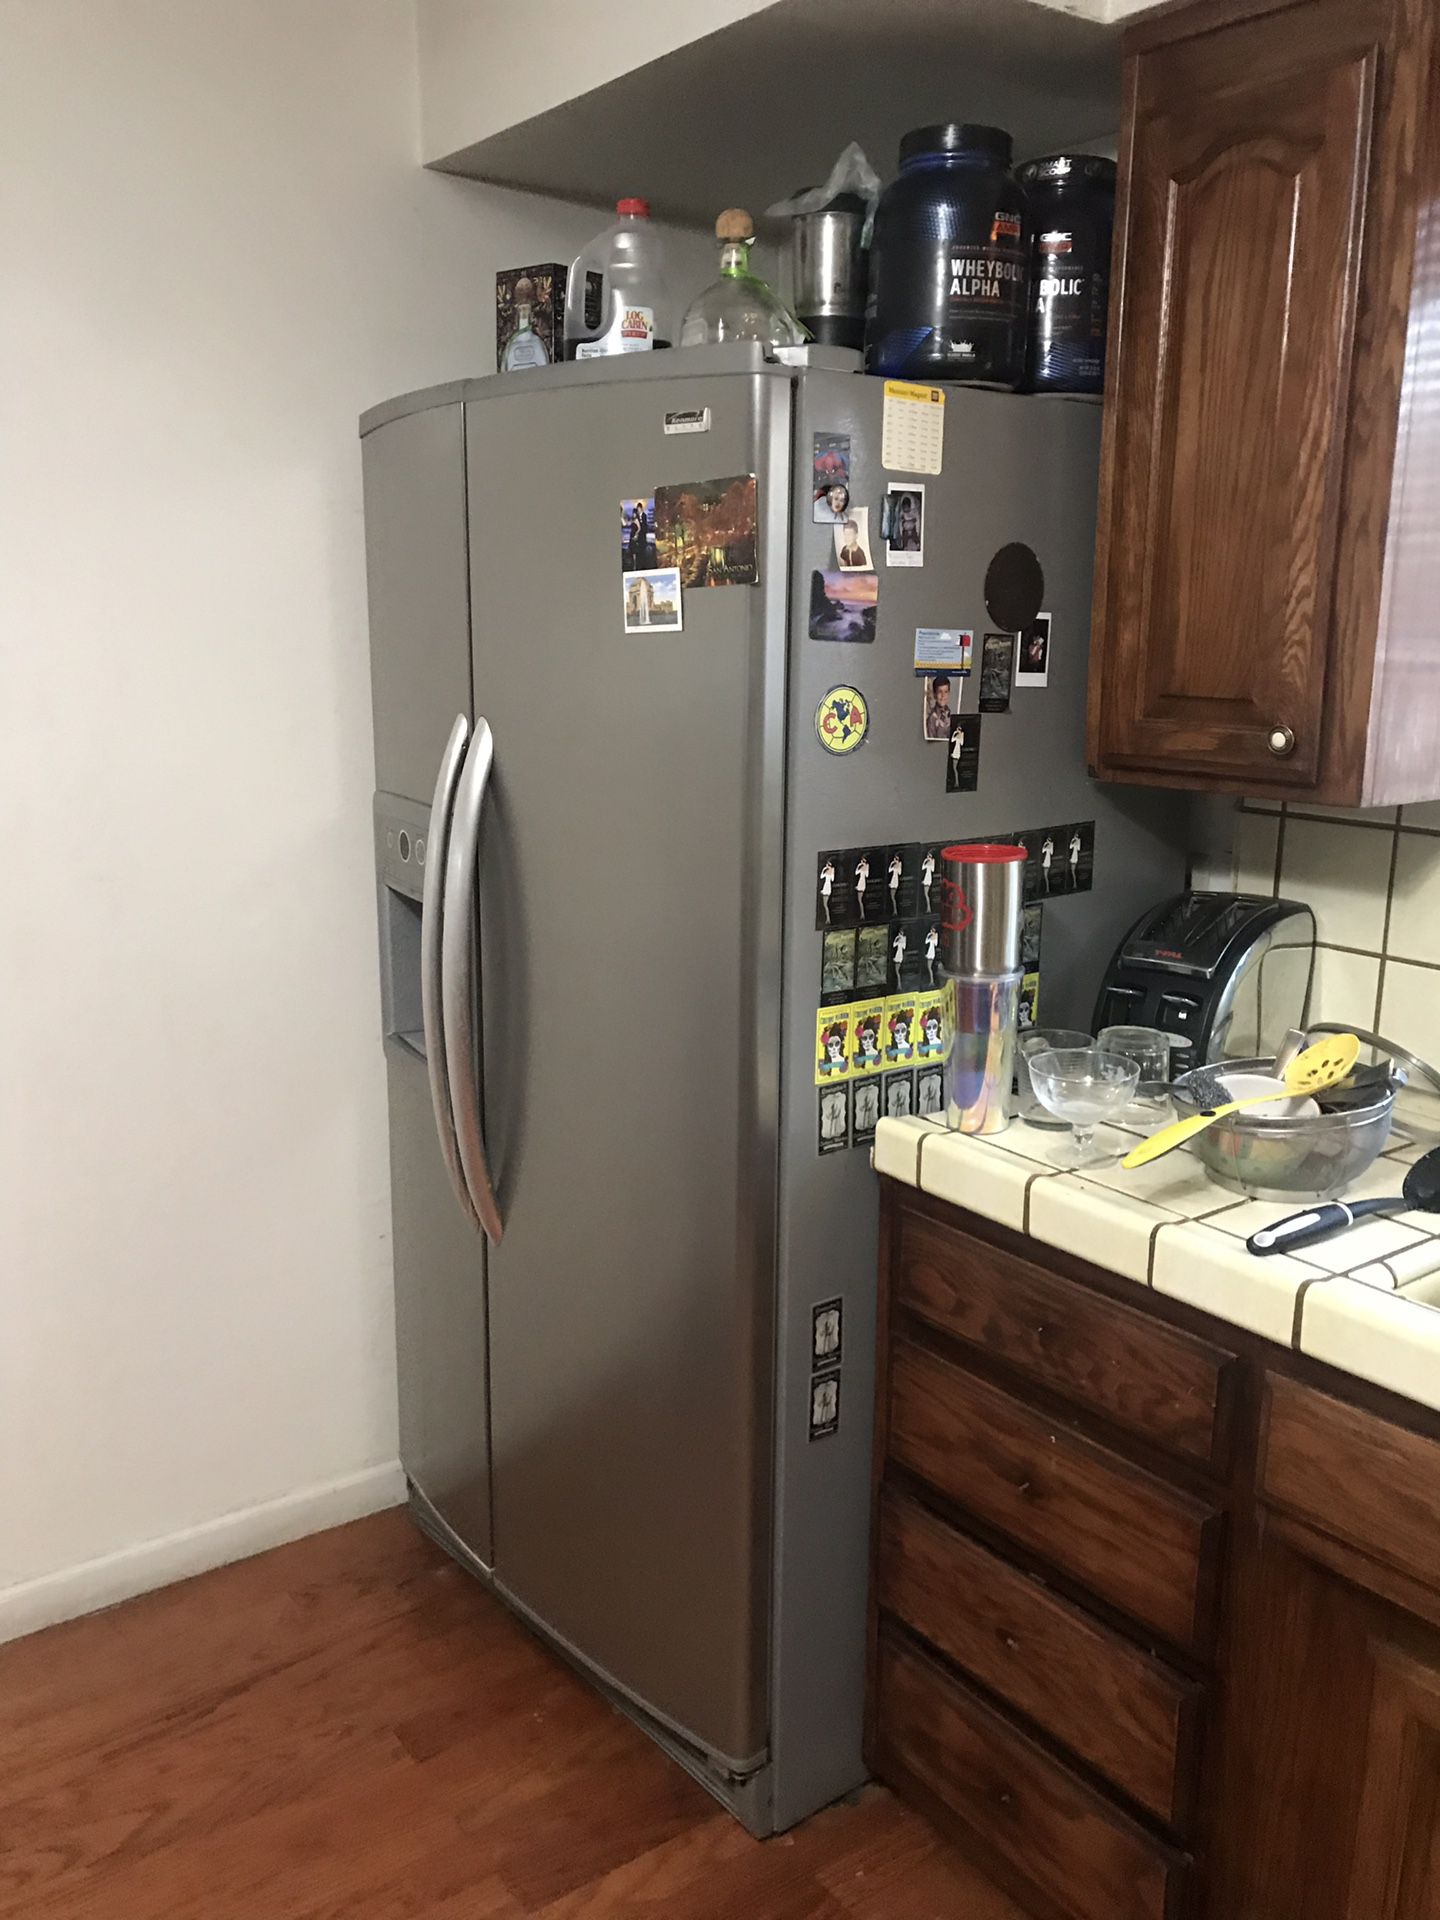 All nice kenmore elite and General Electric profile stainless steel kitchen appliances